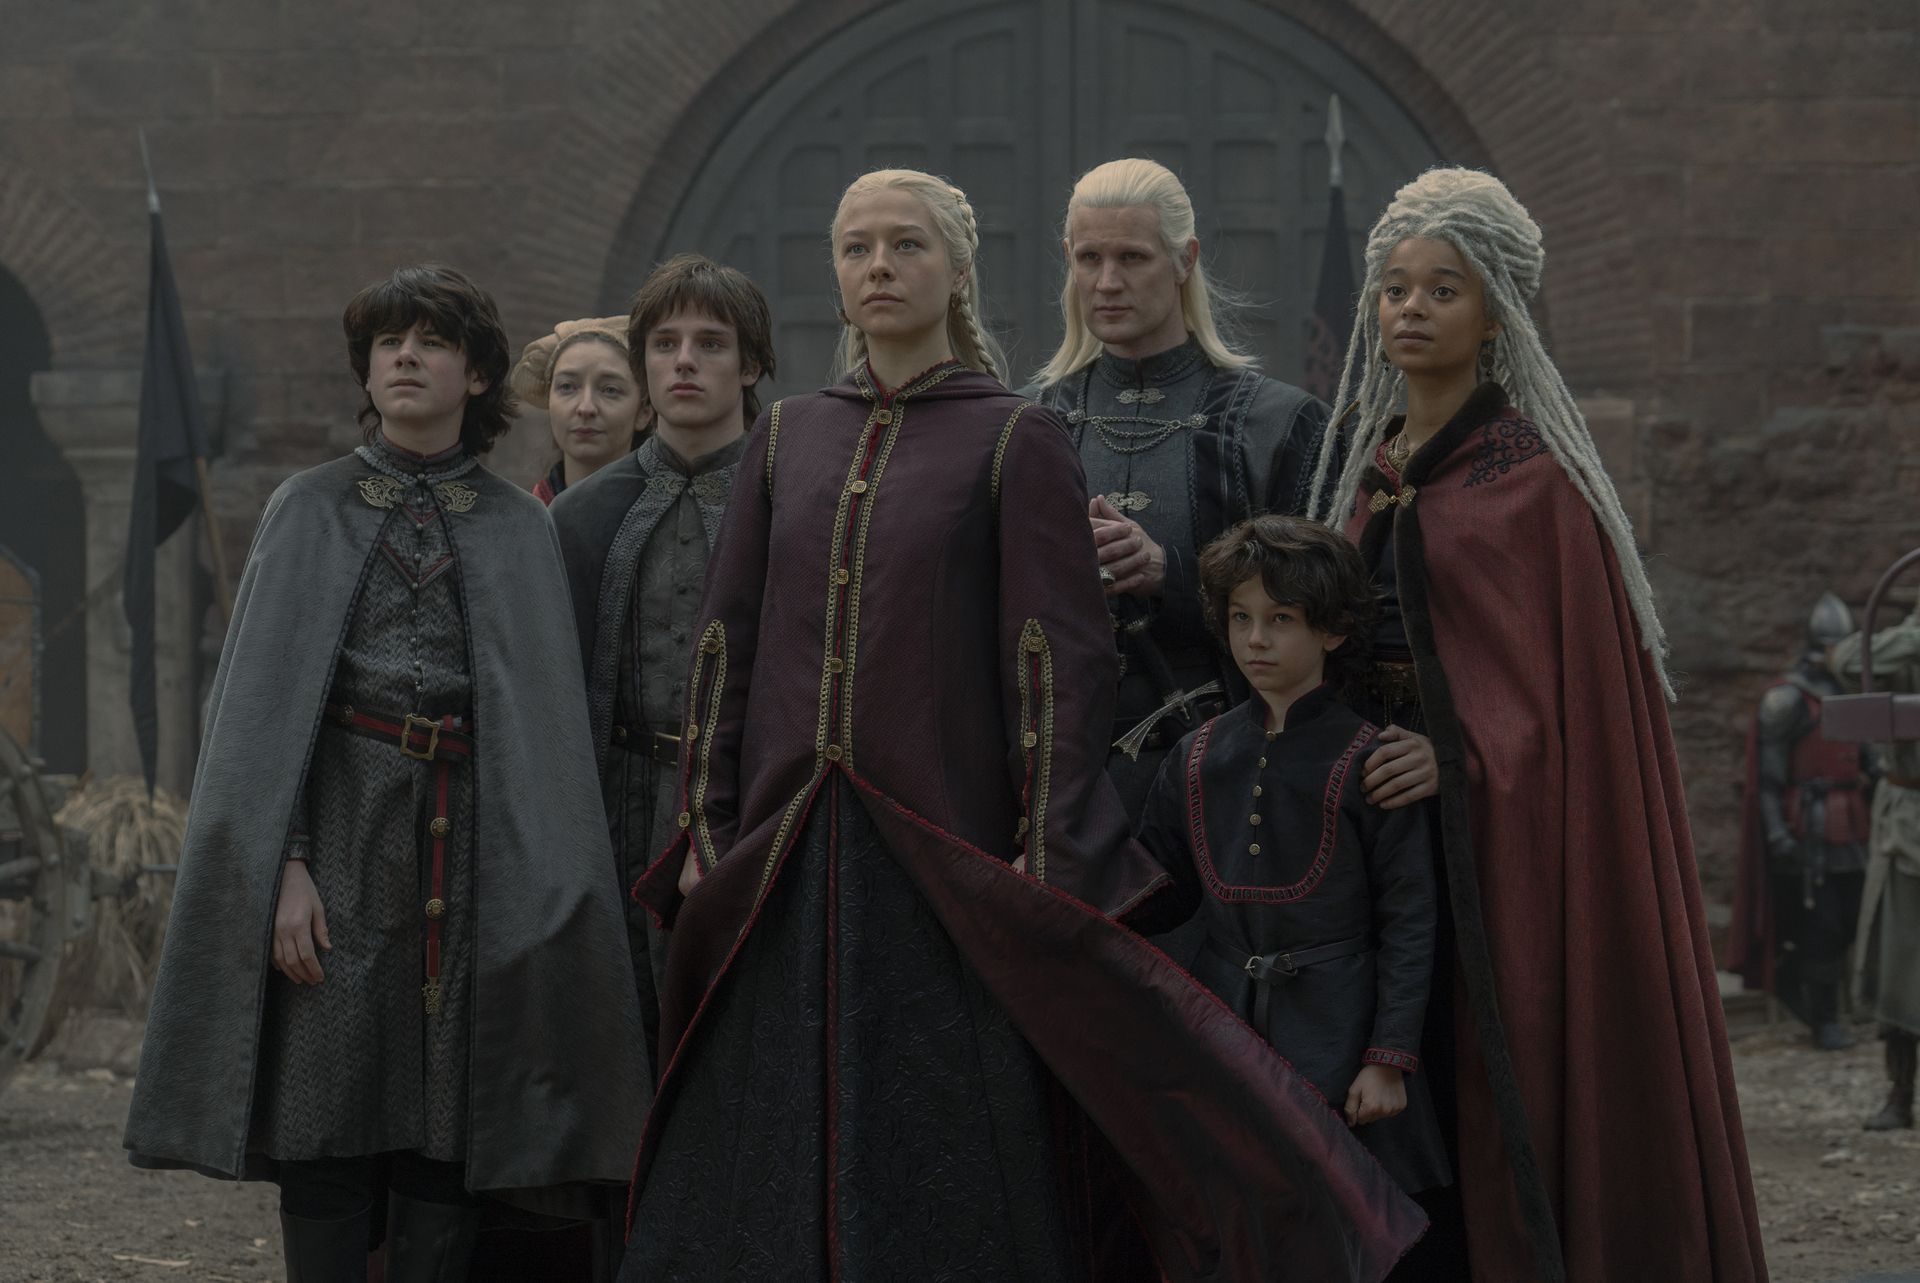 Check out new photos from the House of the Dragon season 1 finale